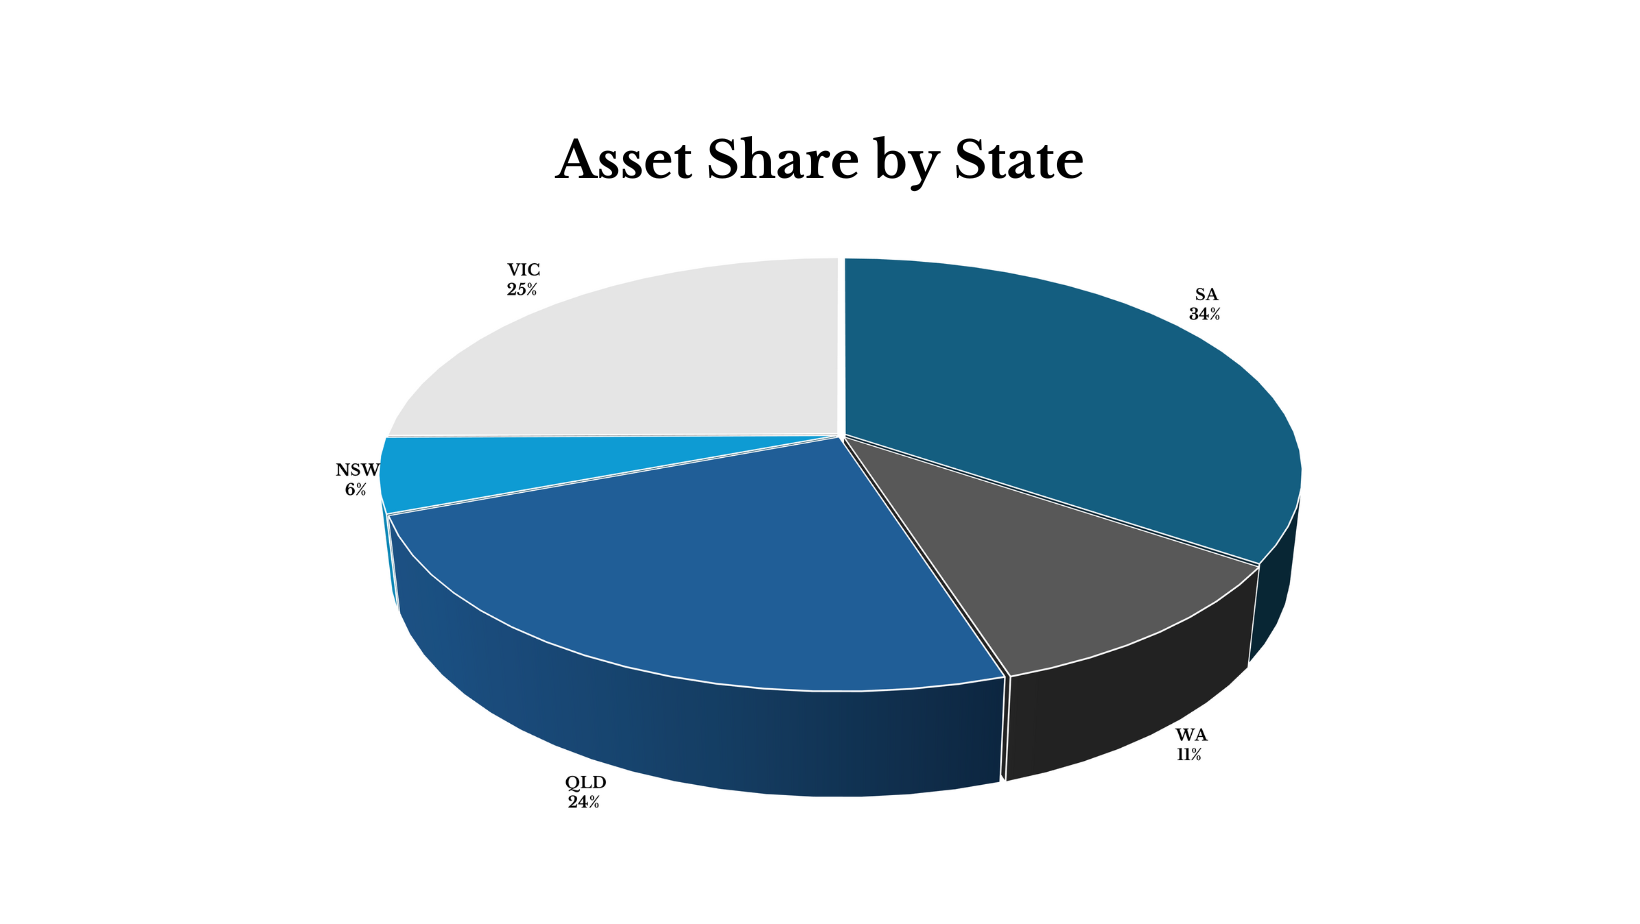 Capital Prudential Asset Share by State